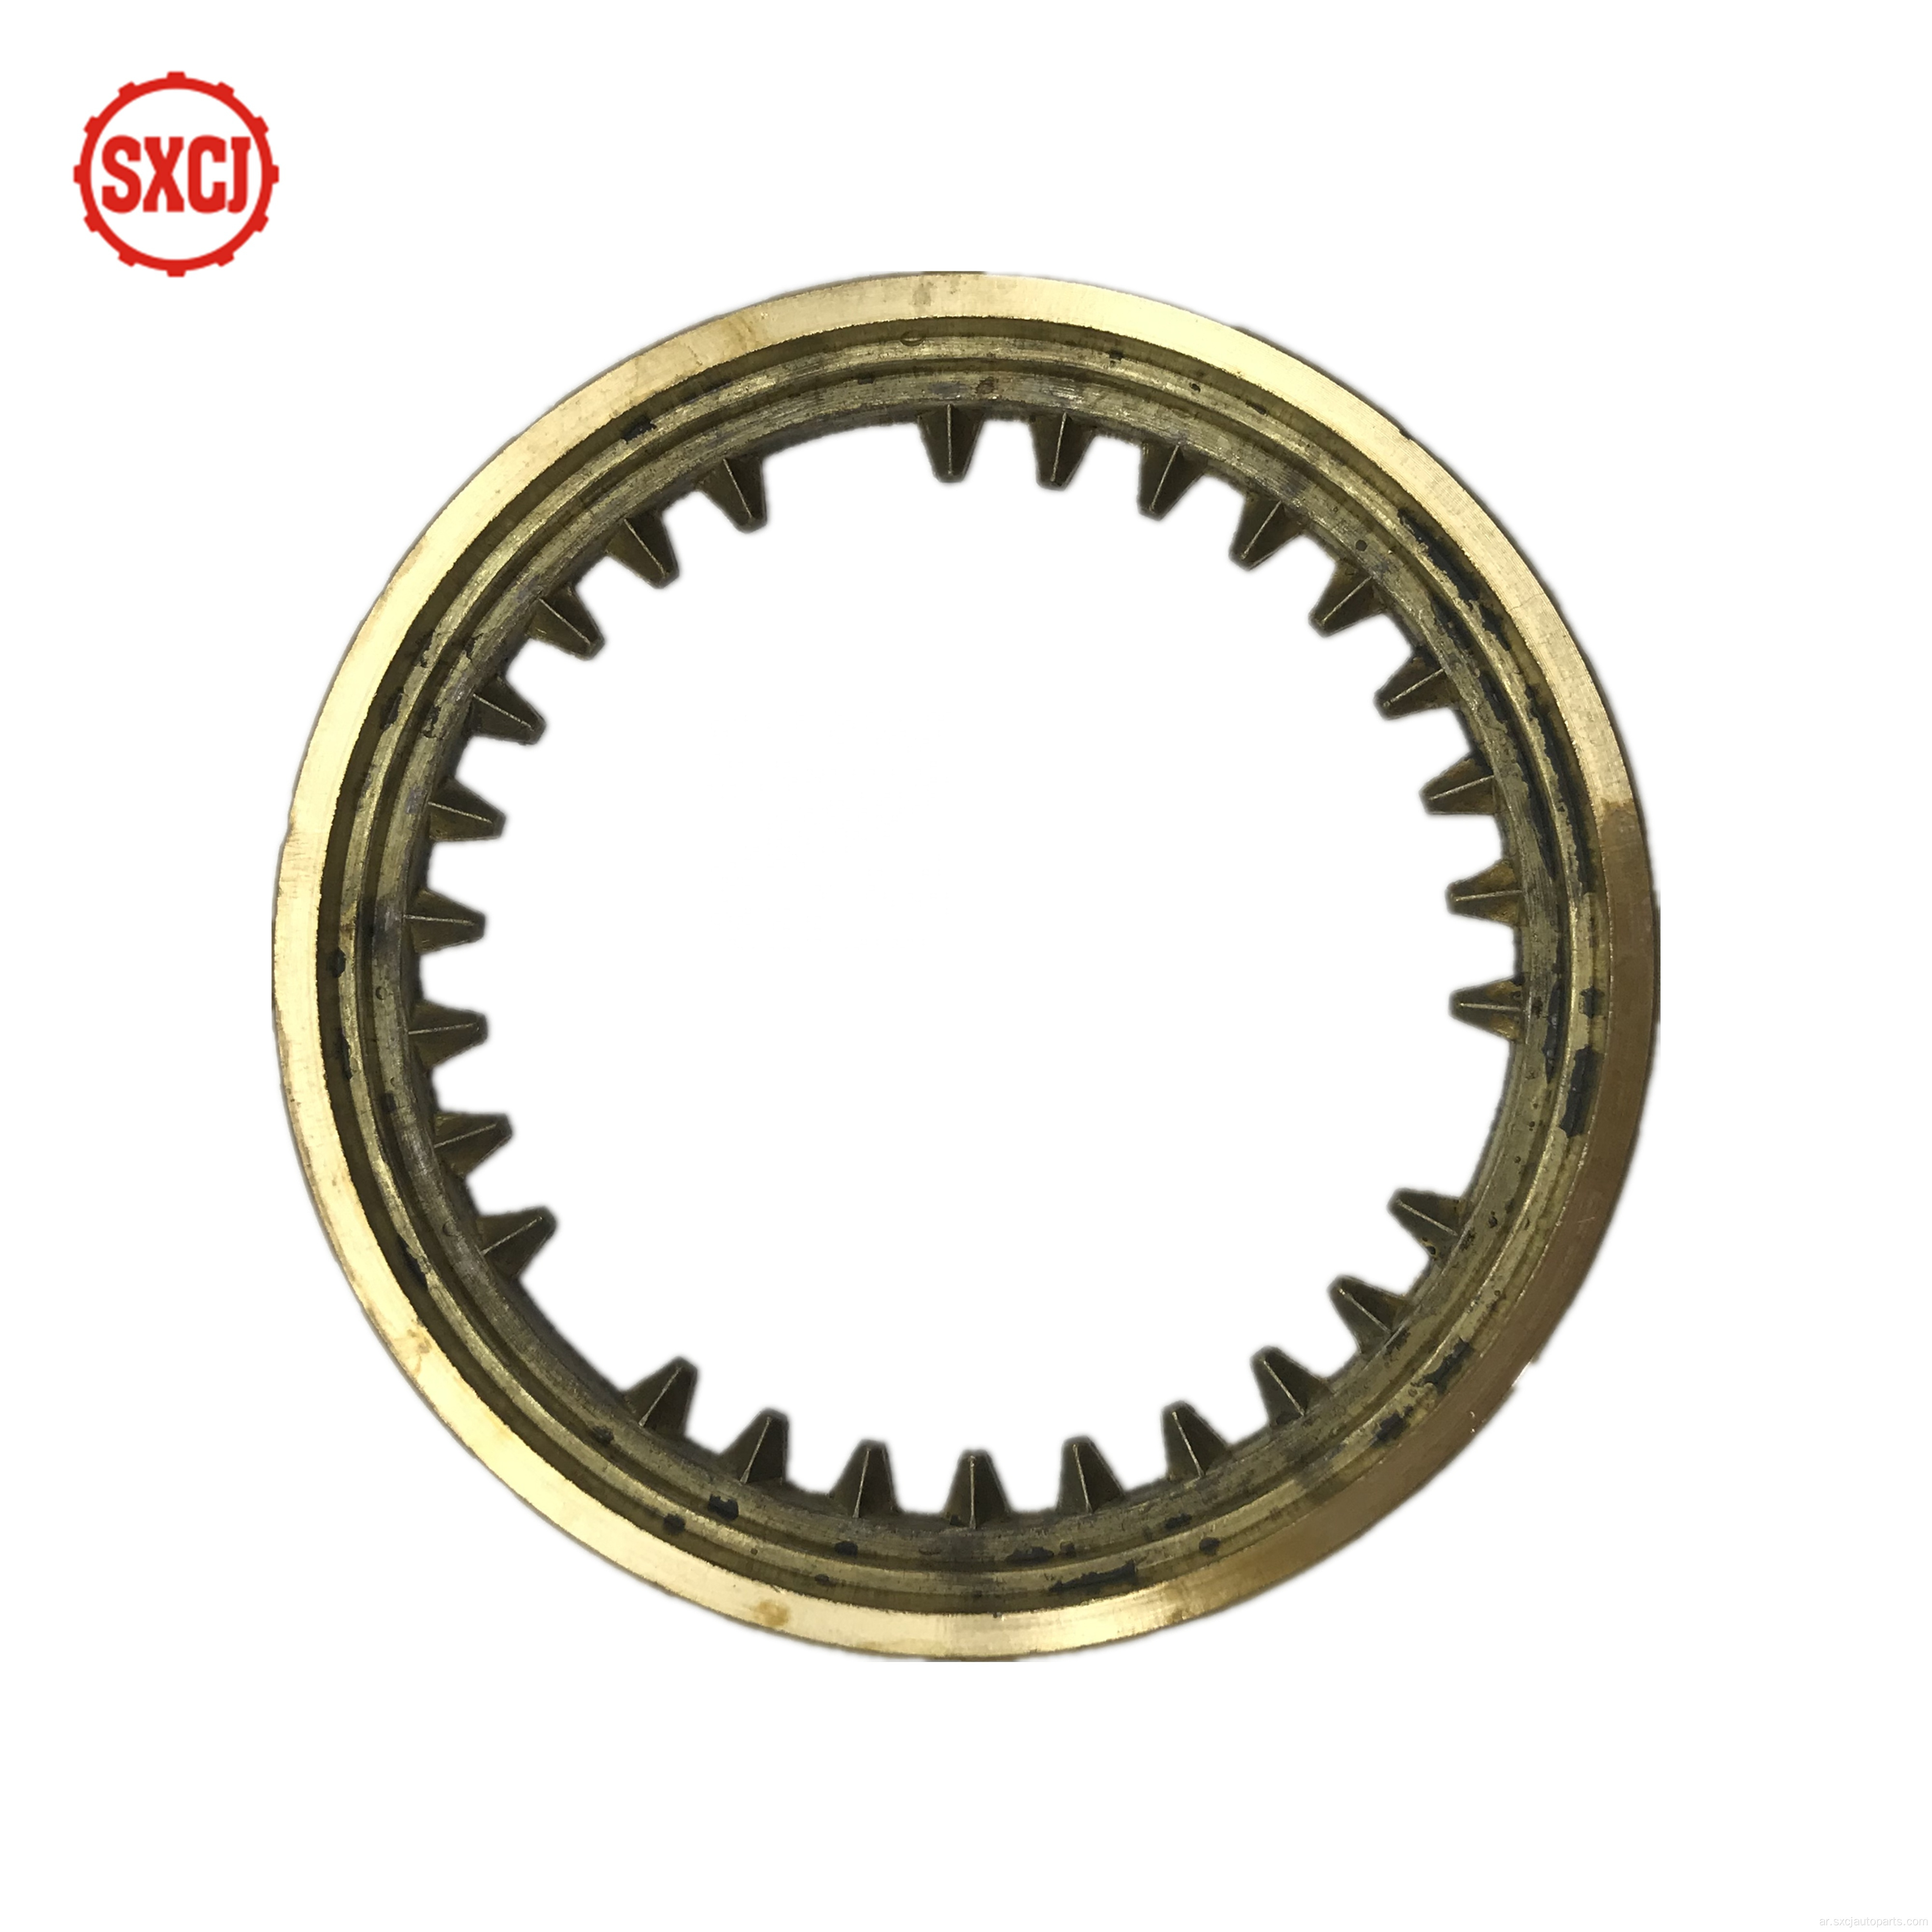 REOLESALE Auto Parts Synchronizer Assembly Transmission Ring 5010-1701164-00 for fiat